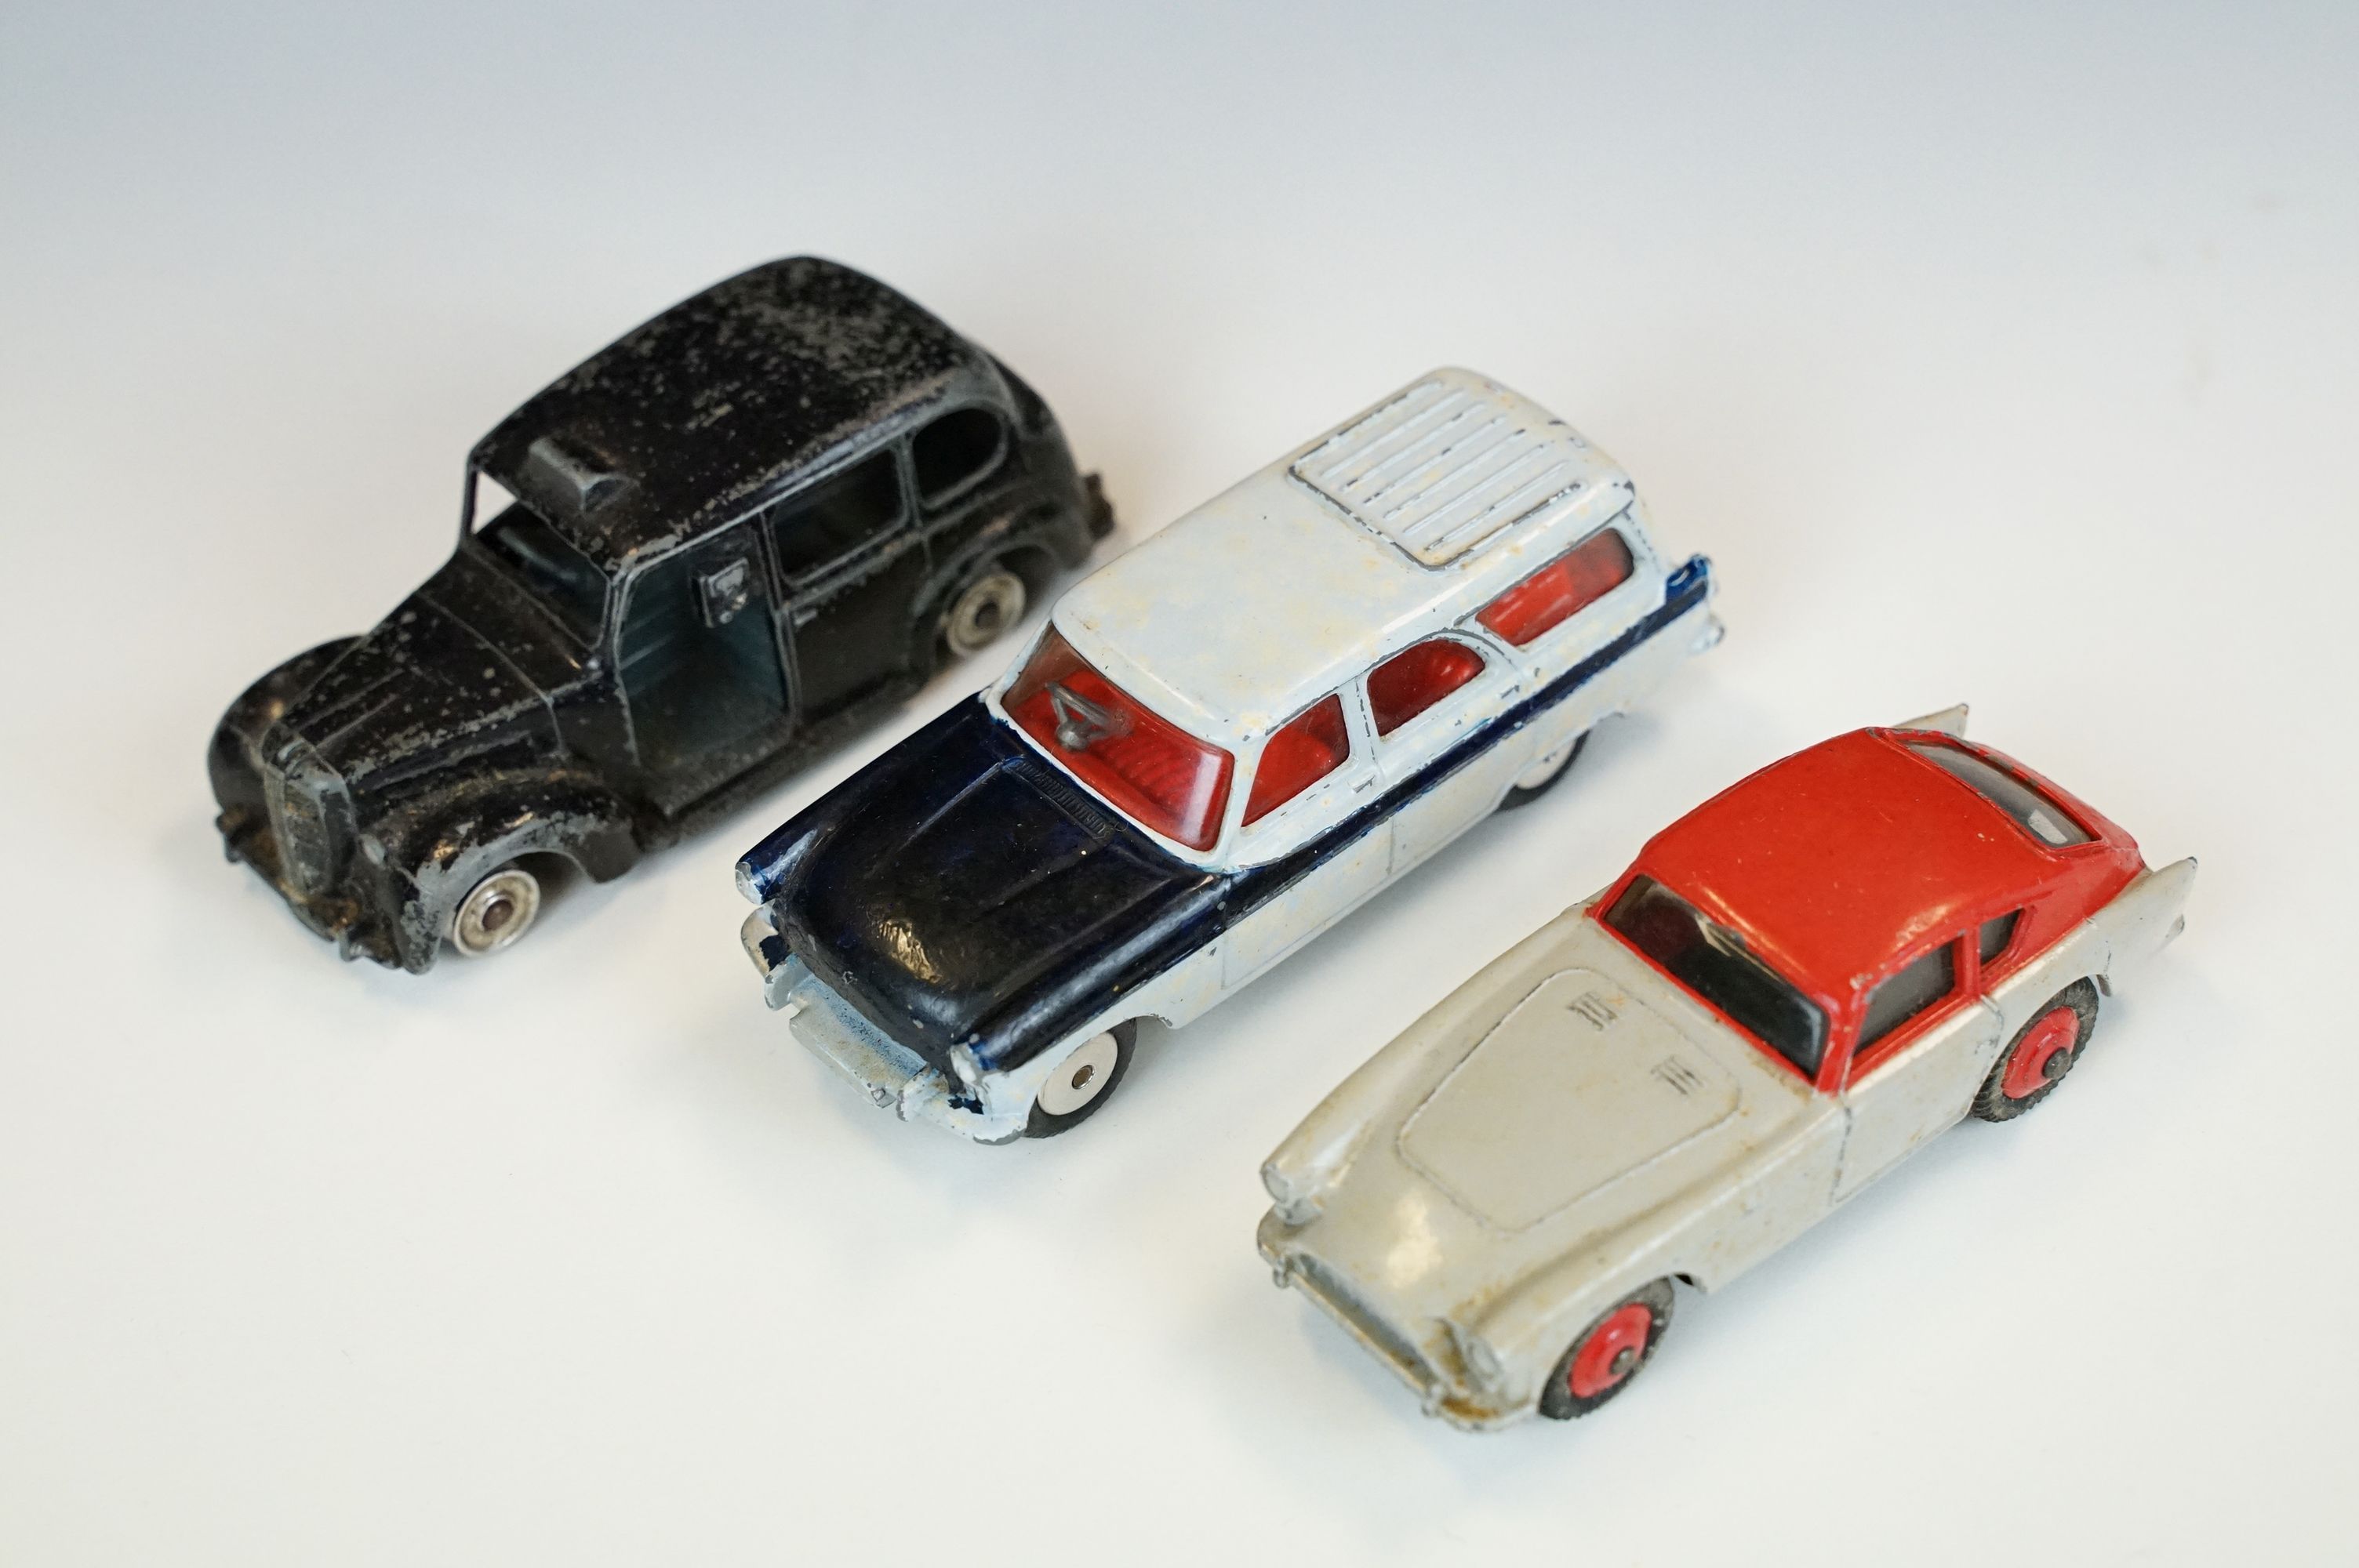 35 Mid 20th C play worn diecast models to include Dinky, Triang & Corgi examples, featuring Triang - Image 12 of 13